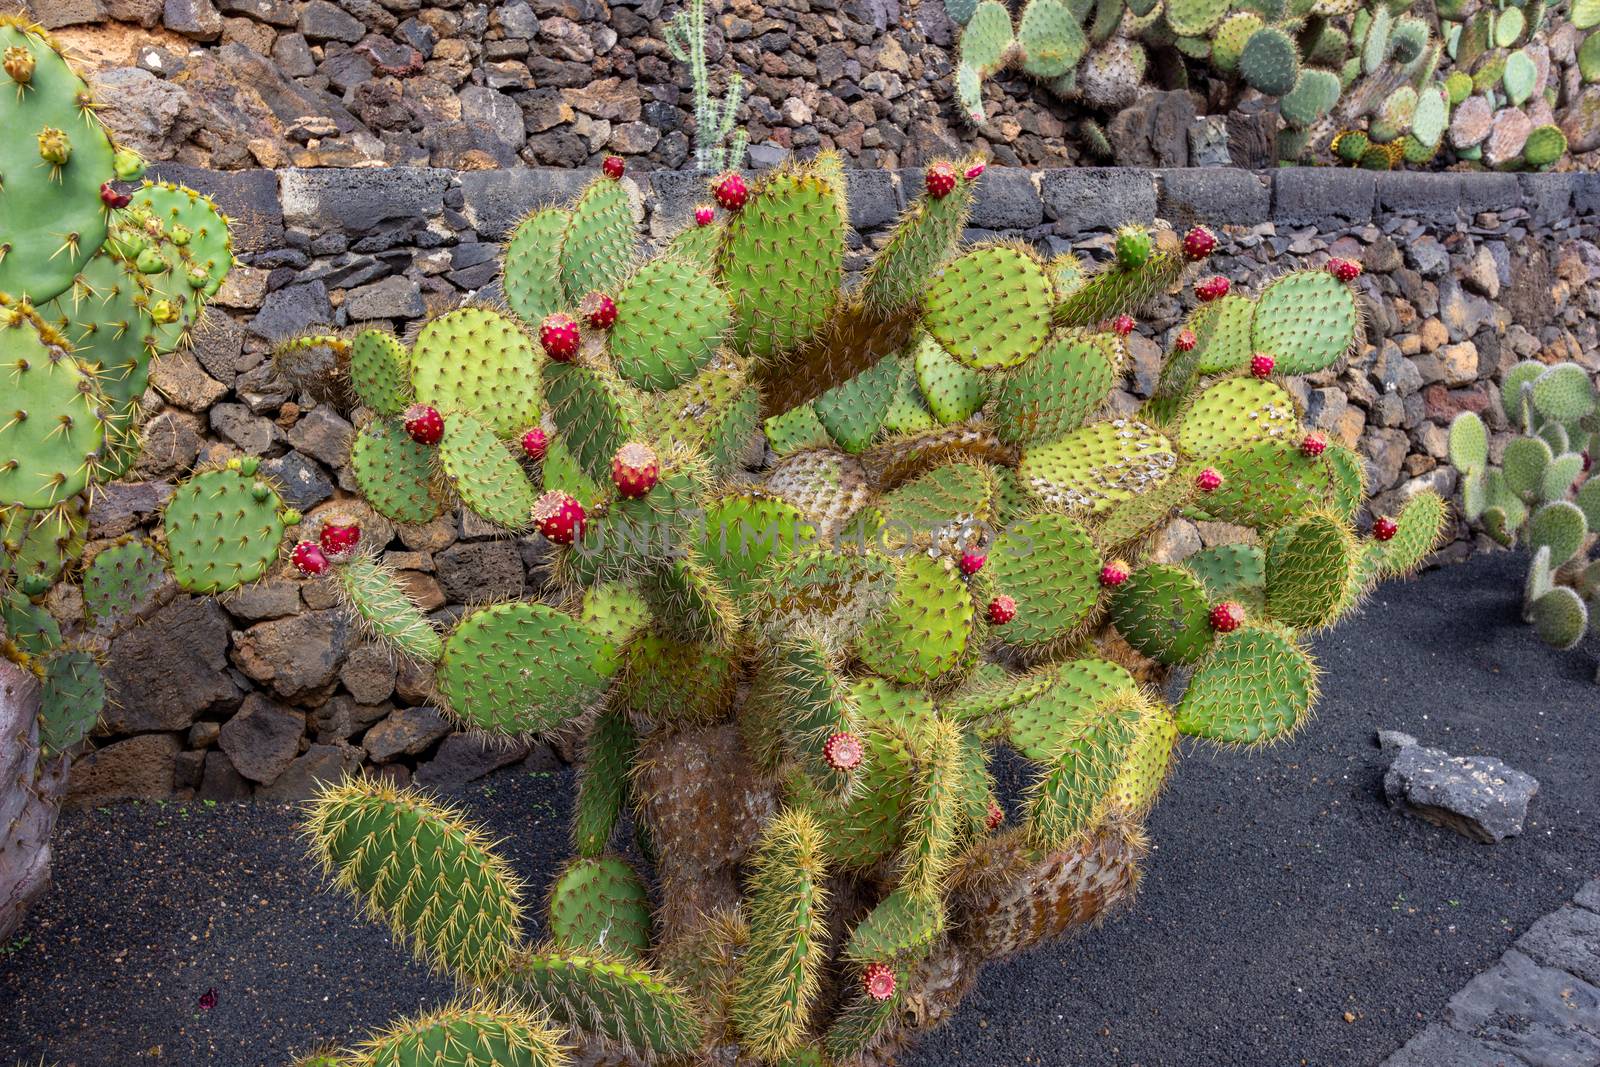 Prickly pear cactus (opuntia) with red fruits in Jardin de Cactu by reinerc